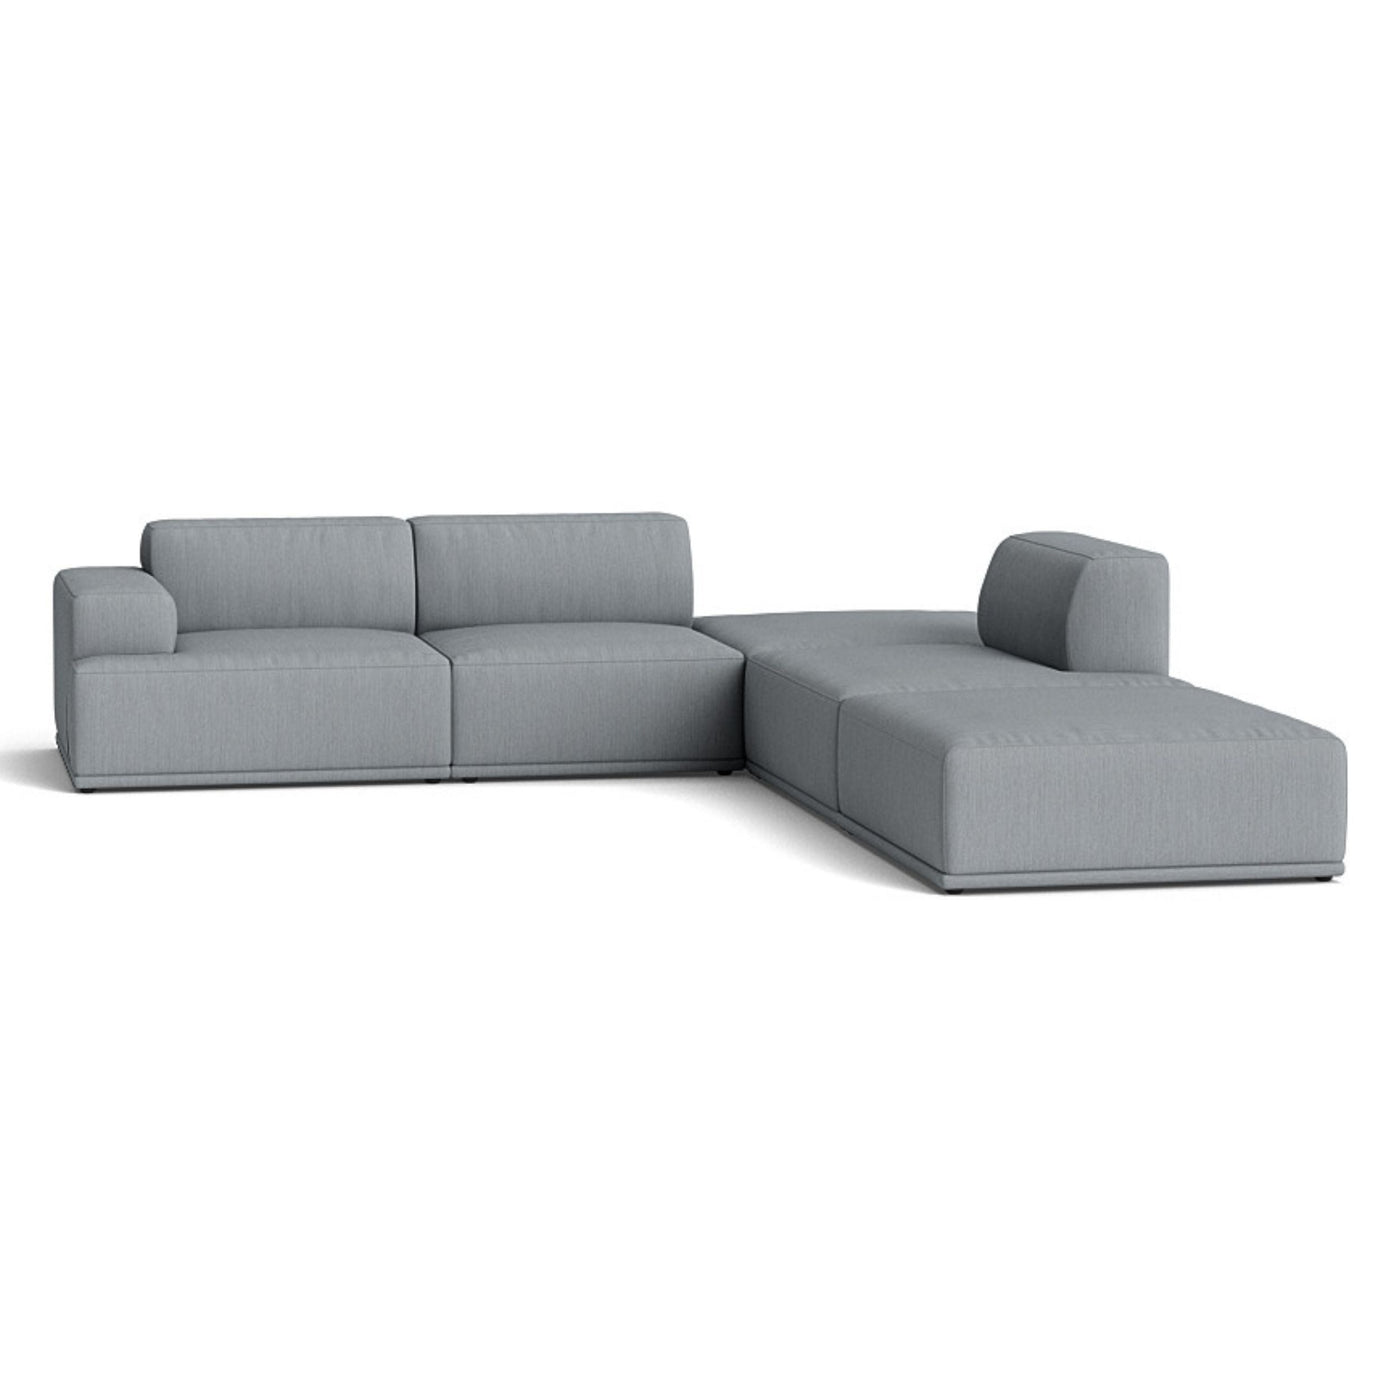 Muuto Connect Soft Modular Corner Sofa, configuration 3.  Made-to-order from someday designs. #colour_balder-1775